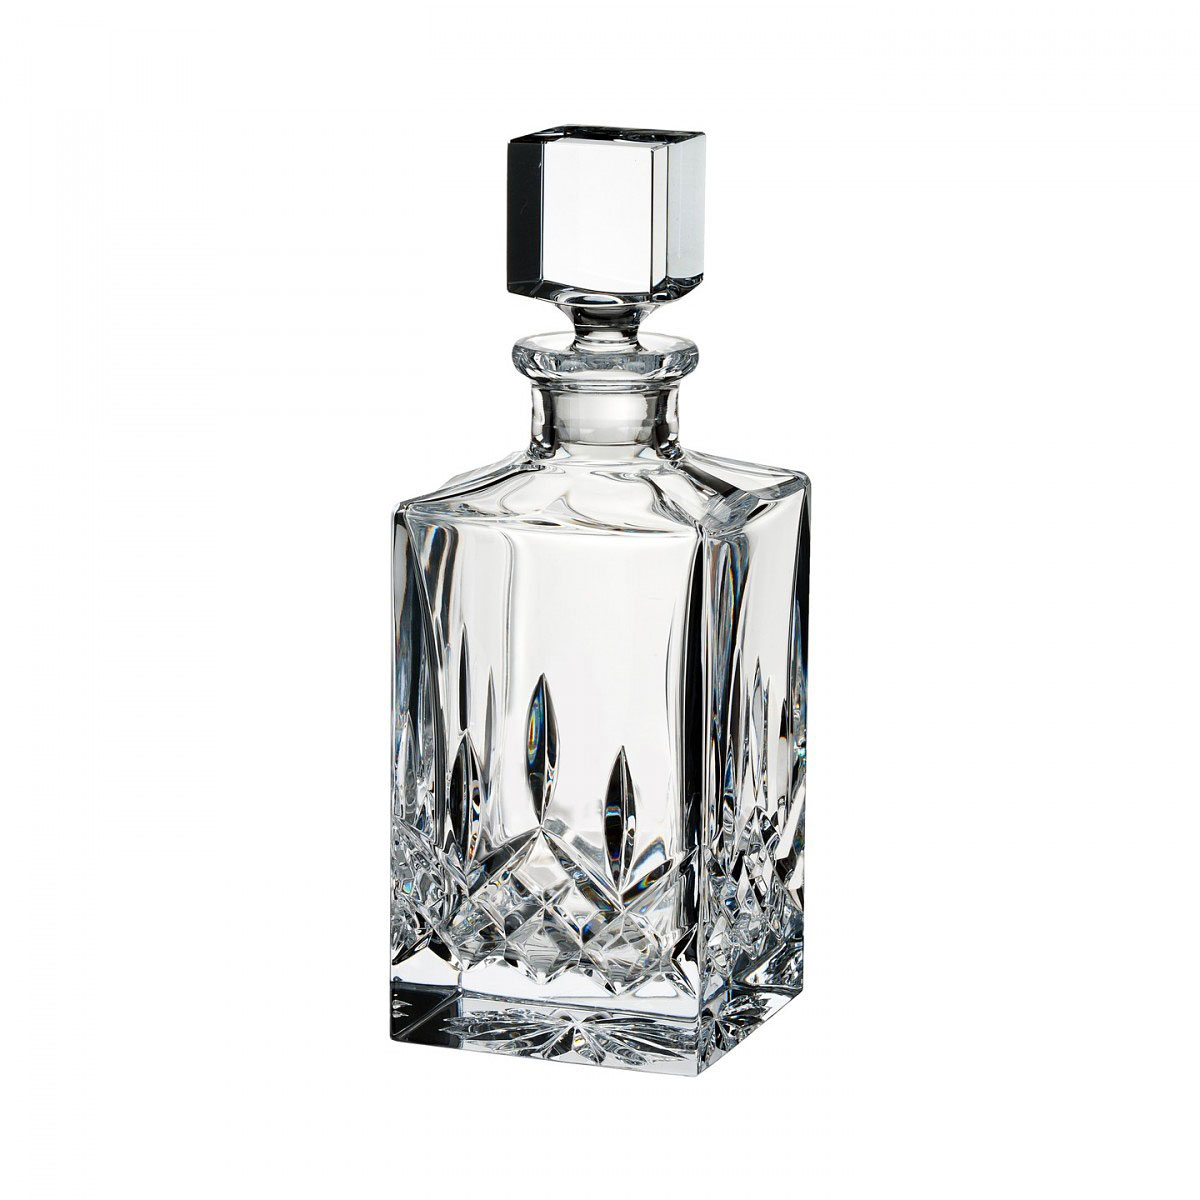 Waterford Lismore Square Crystal Decanter, Clear